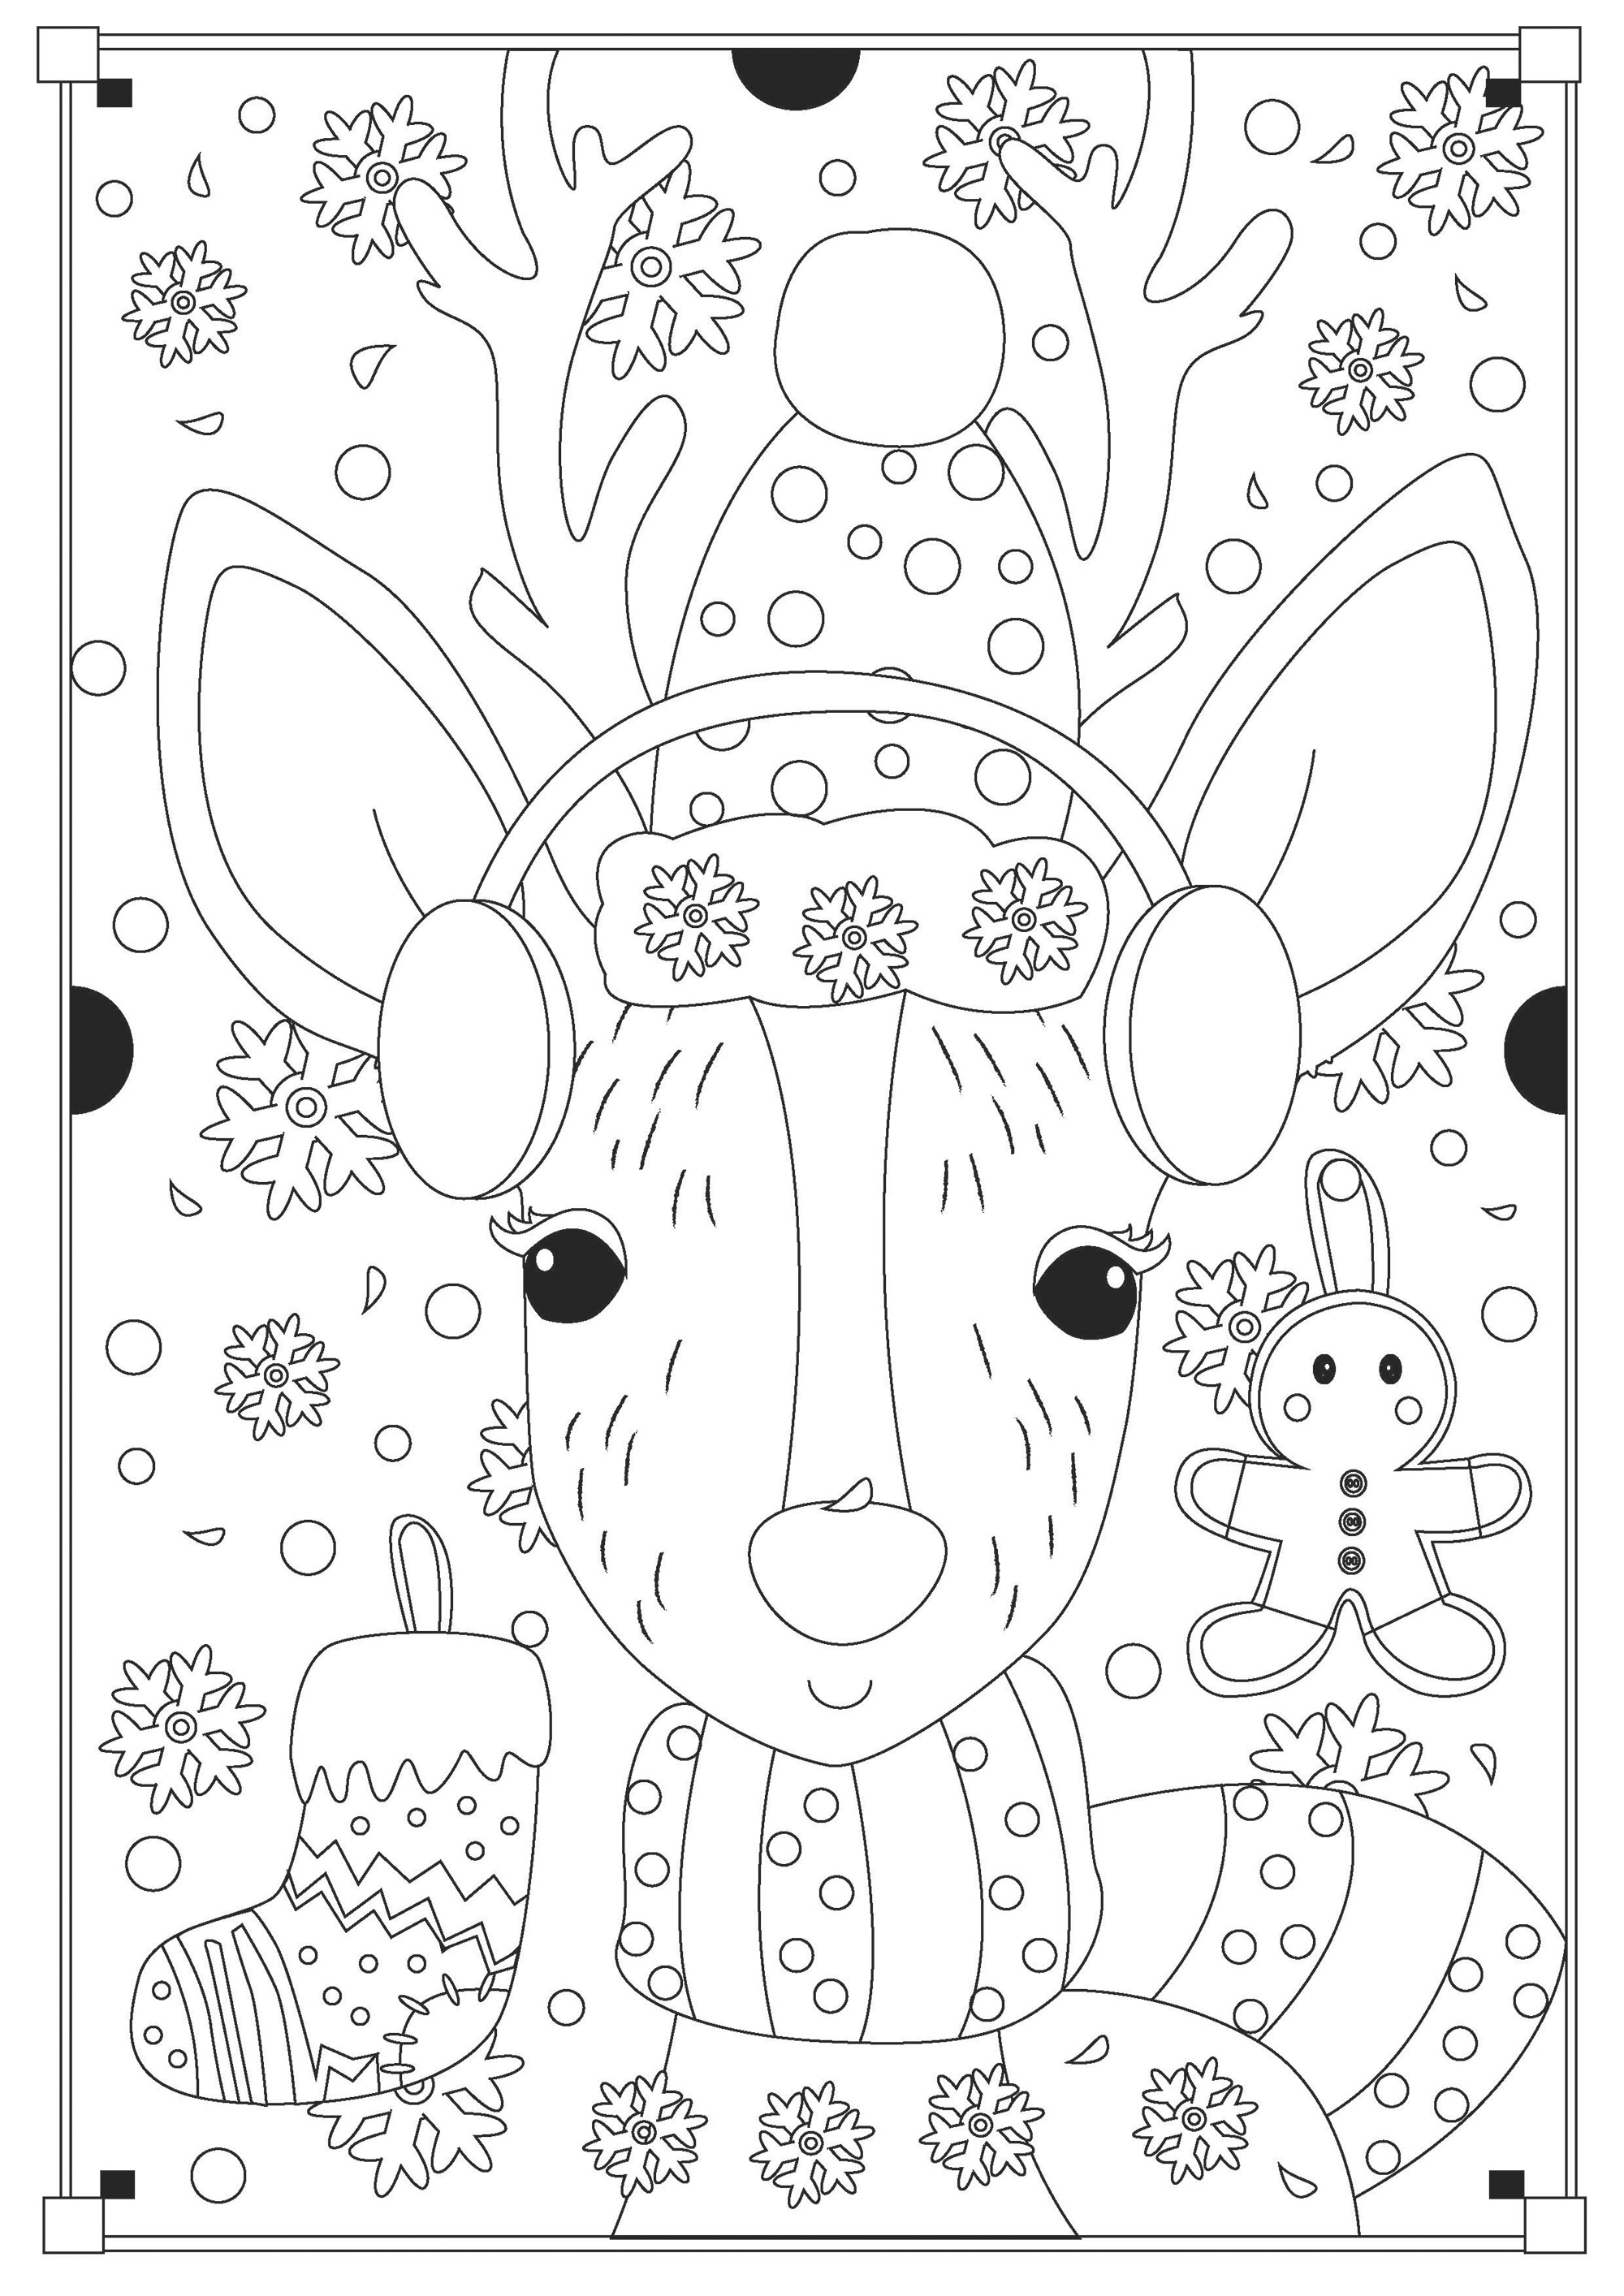 Santa's cute reindeer. Also color in the many elements that surround it, linked to the Christmas spirit, Artist : Gaelle Picard